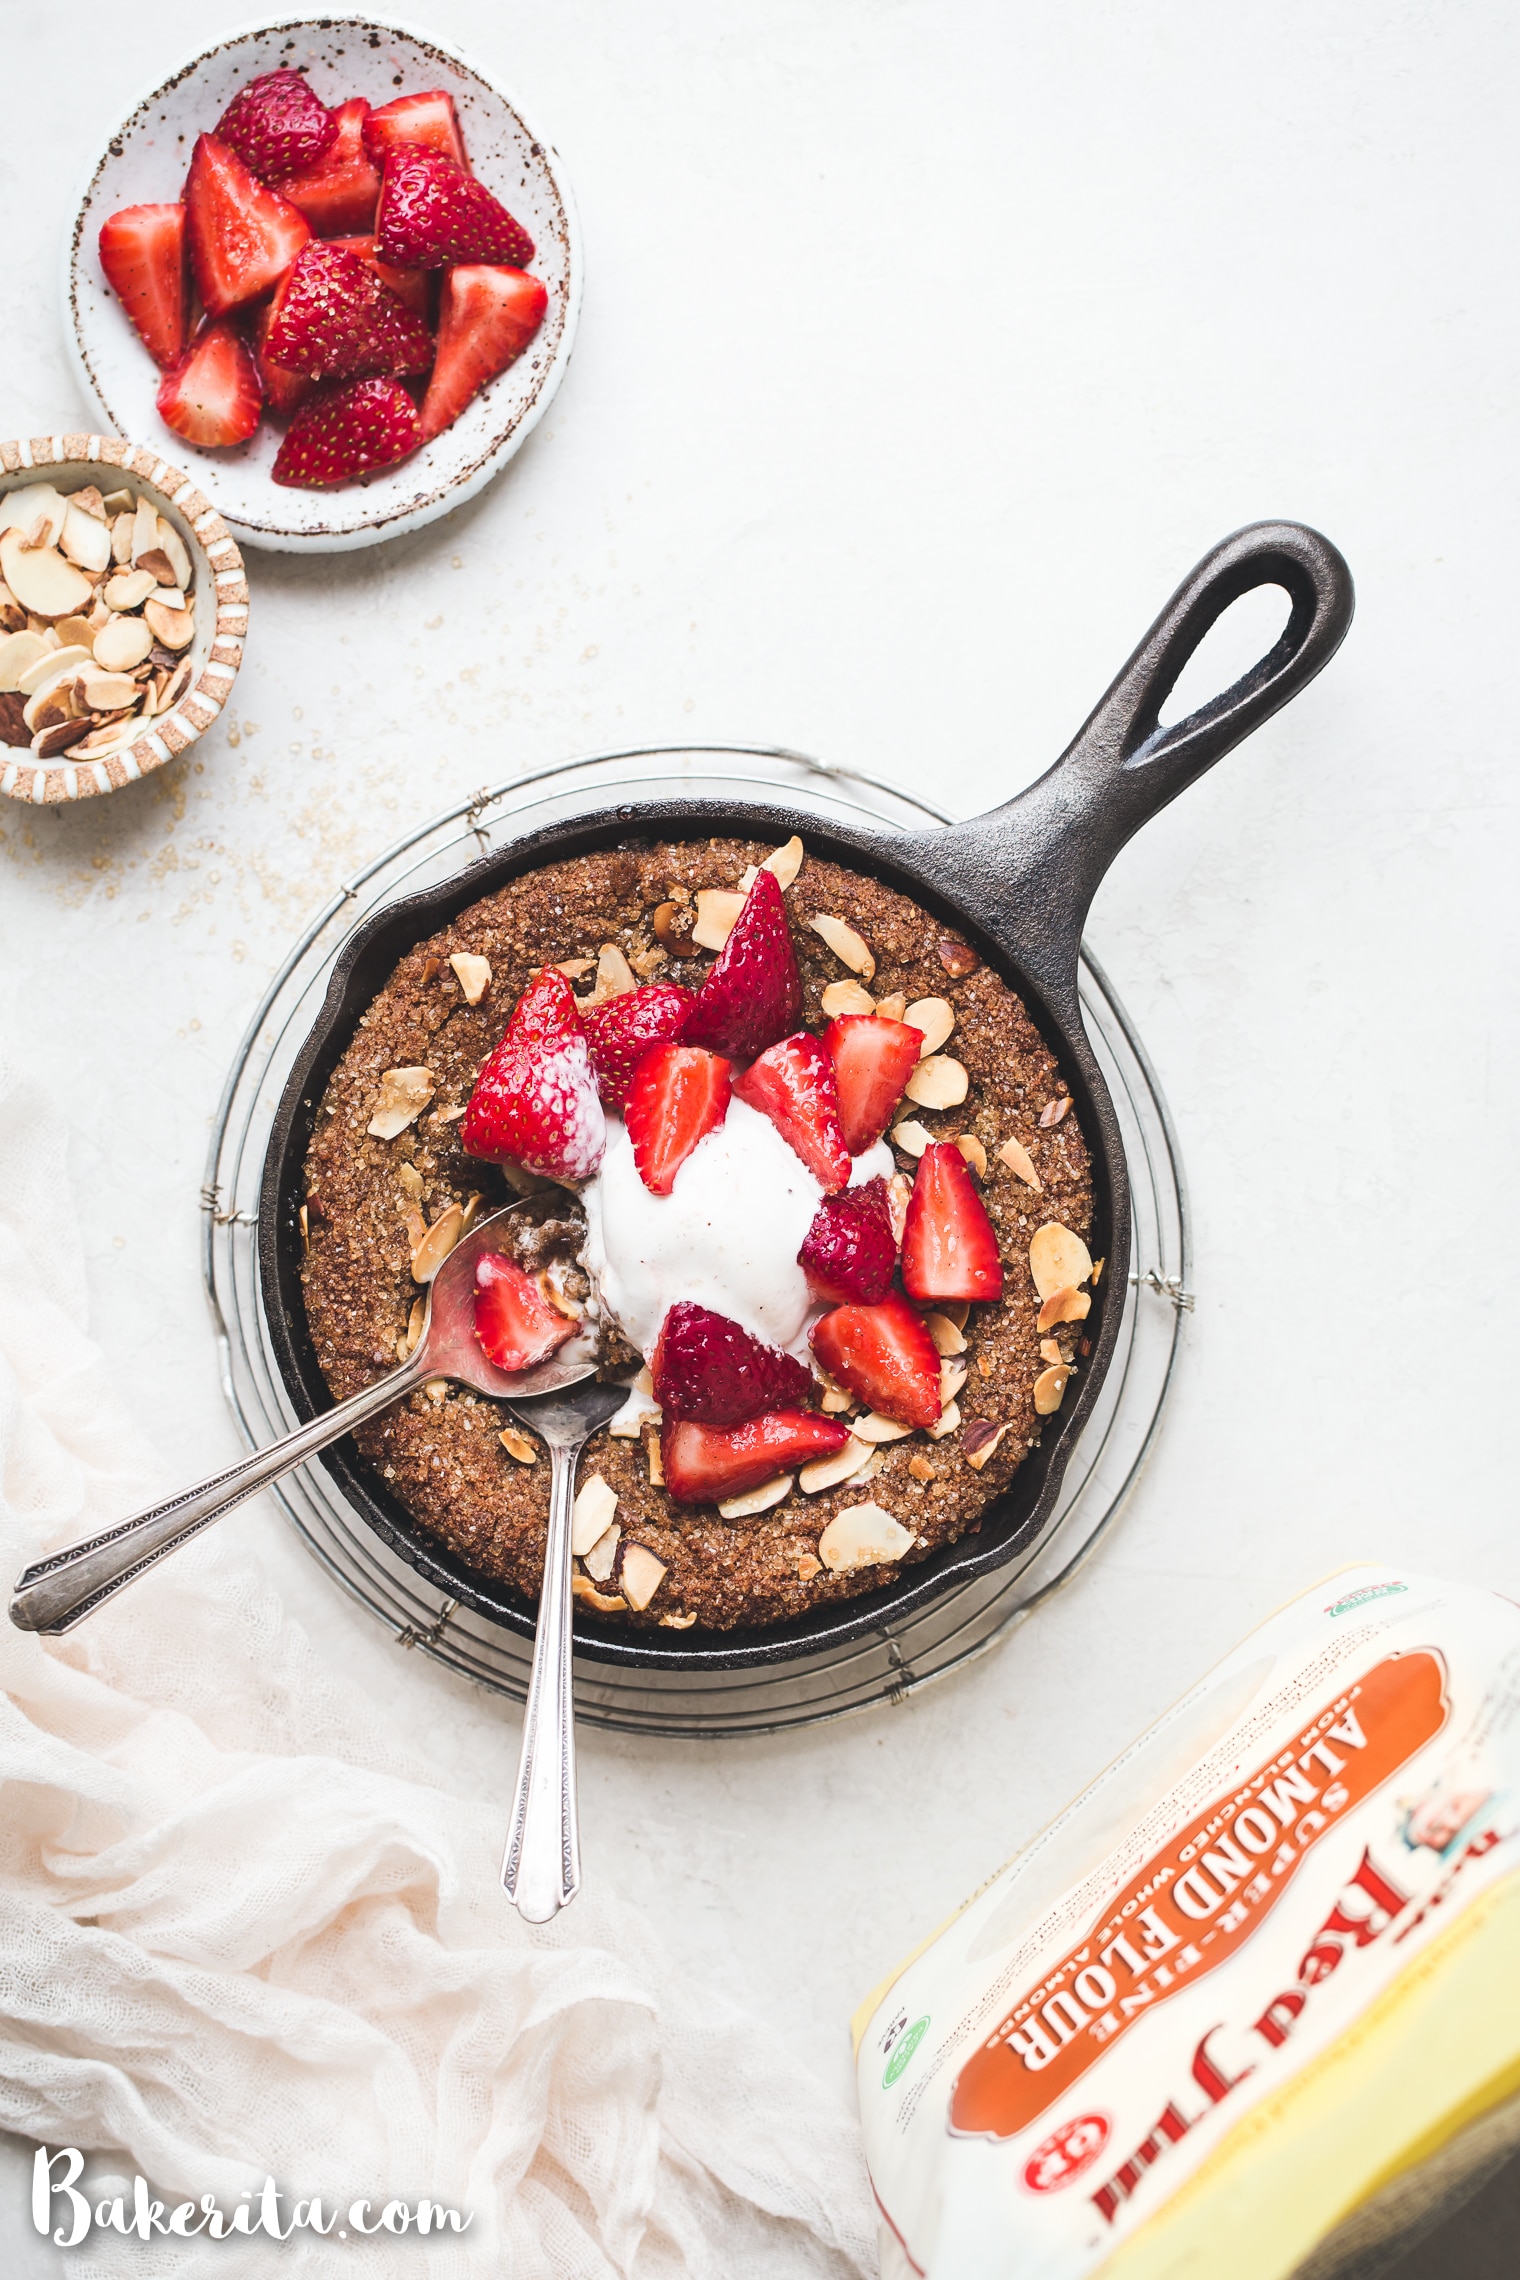 This Gluten-Free & Vegan Sugar Cookie Skillet will make your mouth water! You'll love this easy sugar cookie recipe - it's gluten-free, vegan, paleo, and topped with sliced almonds and raw turbinado sugar.